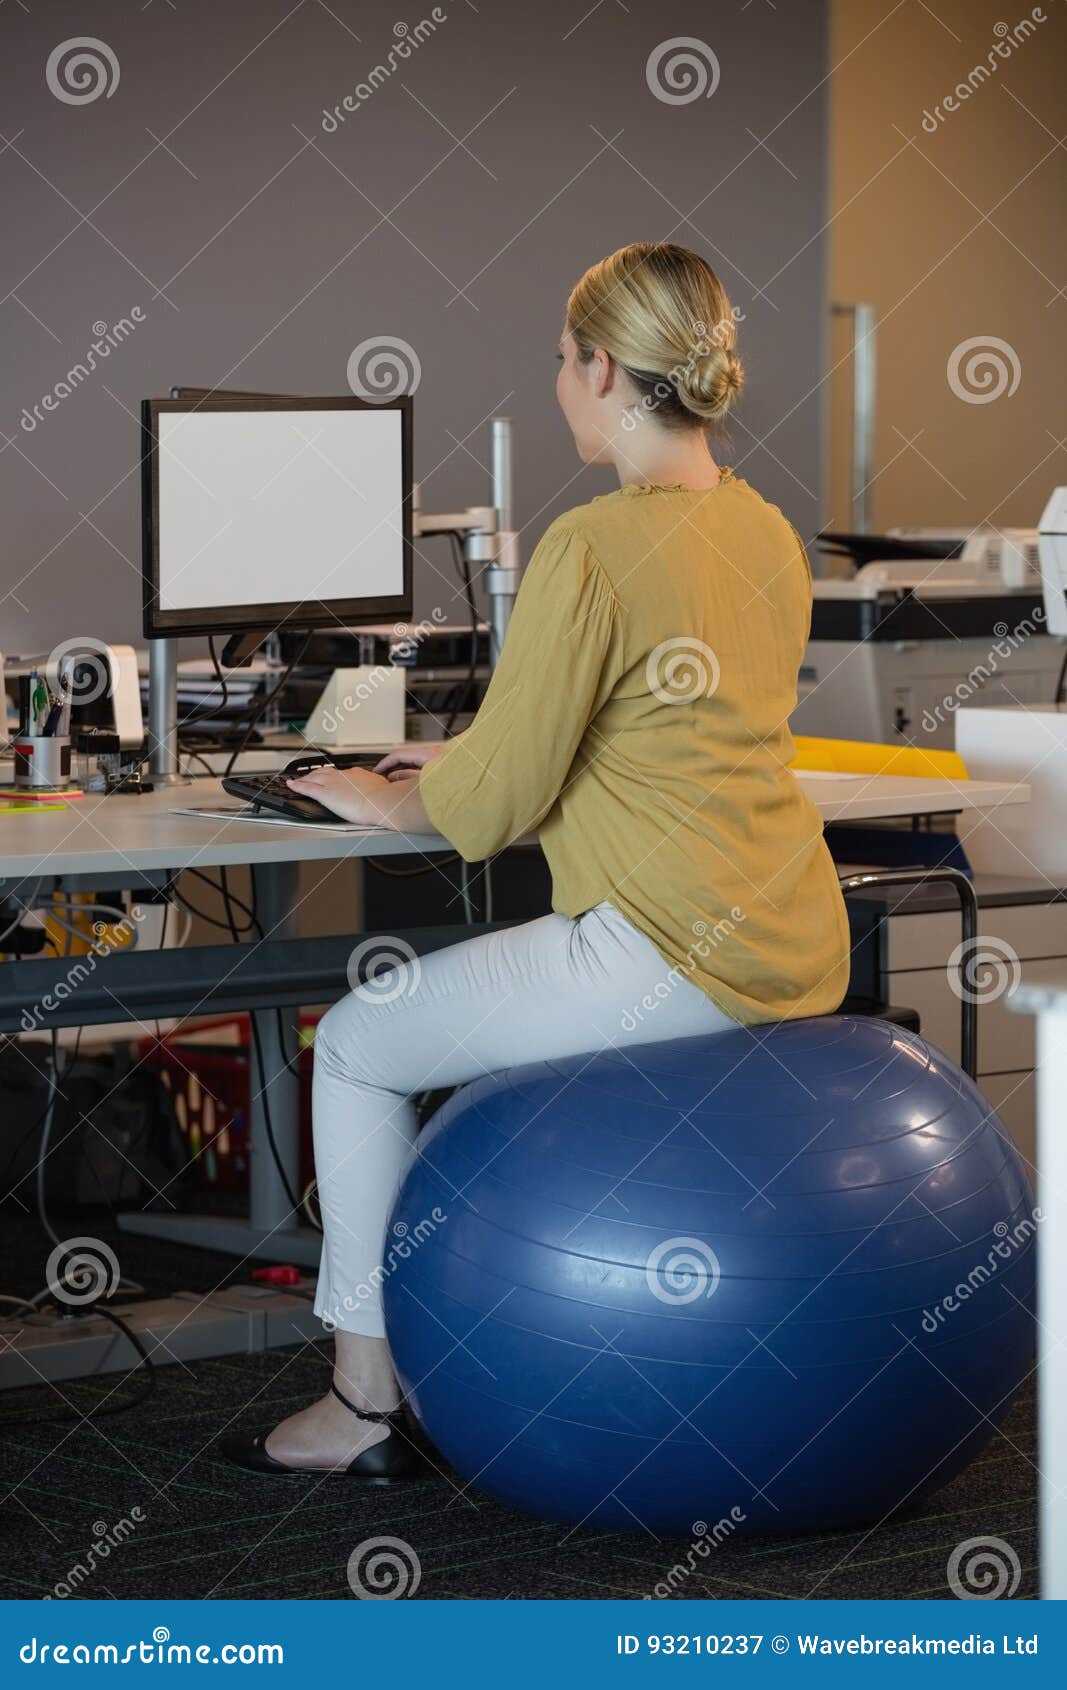 Rear View Executive Sitting On Exercise Ball While Working At Desk